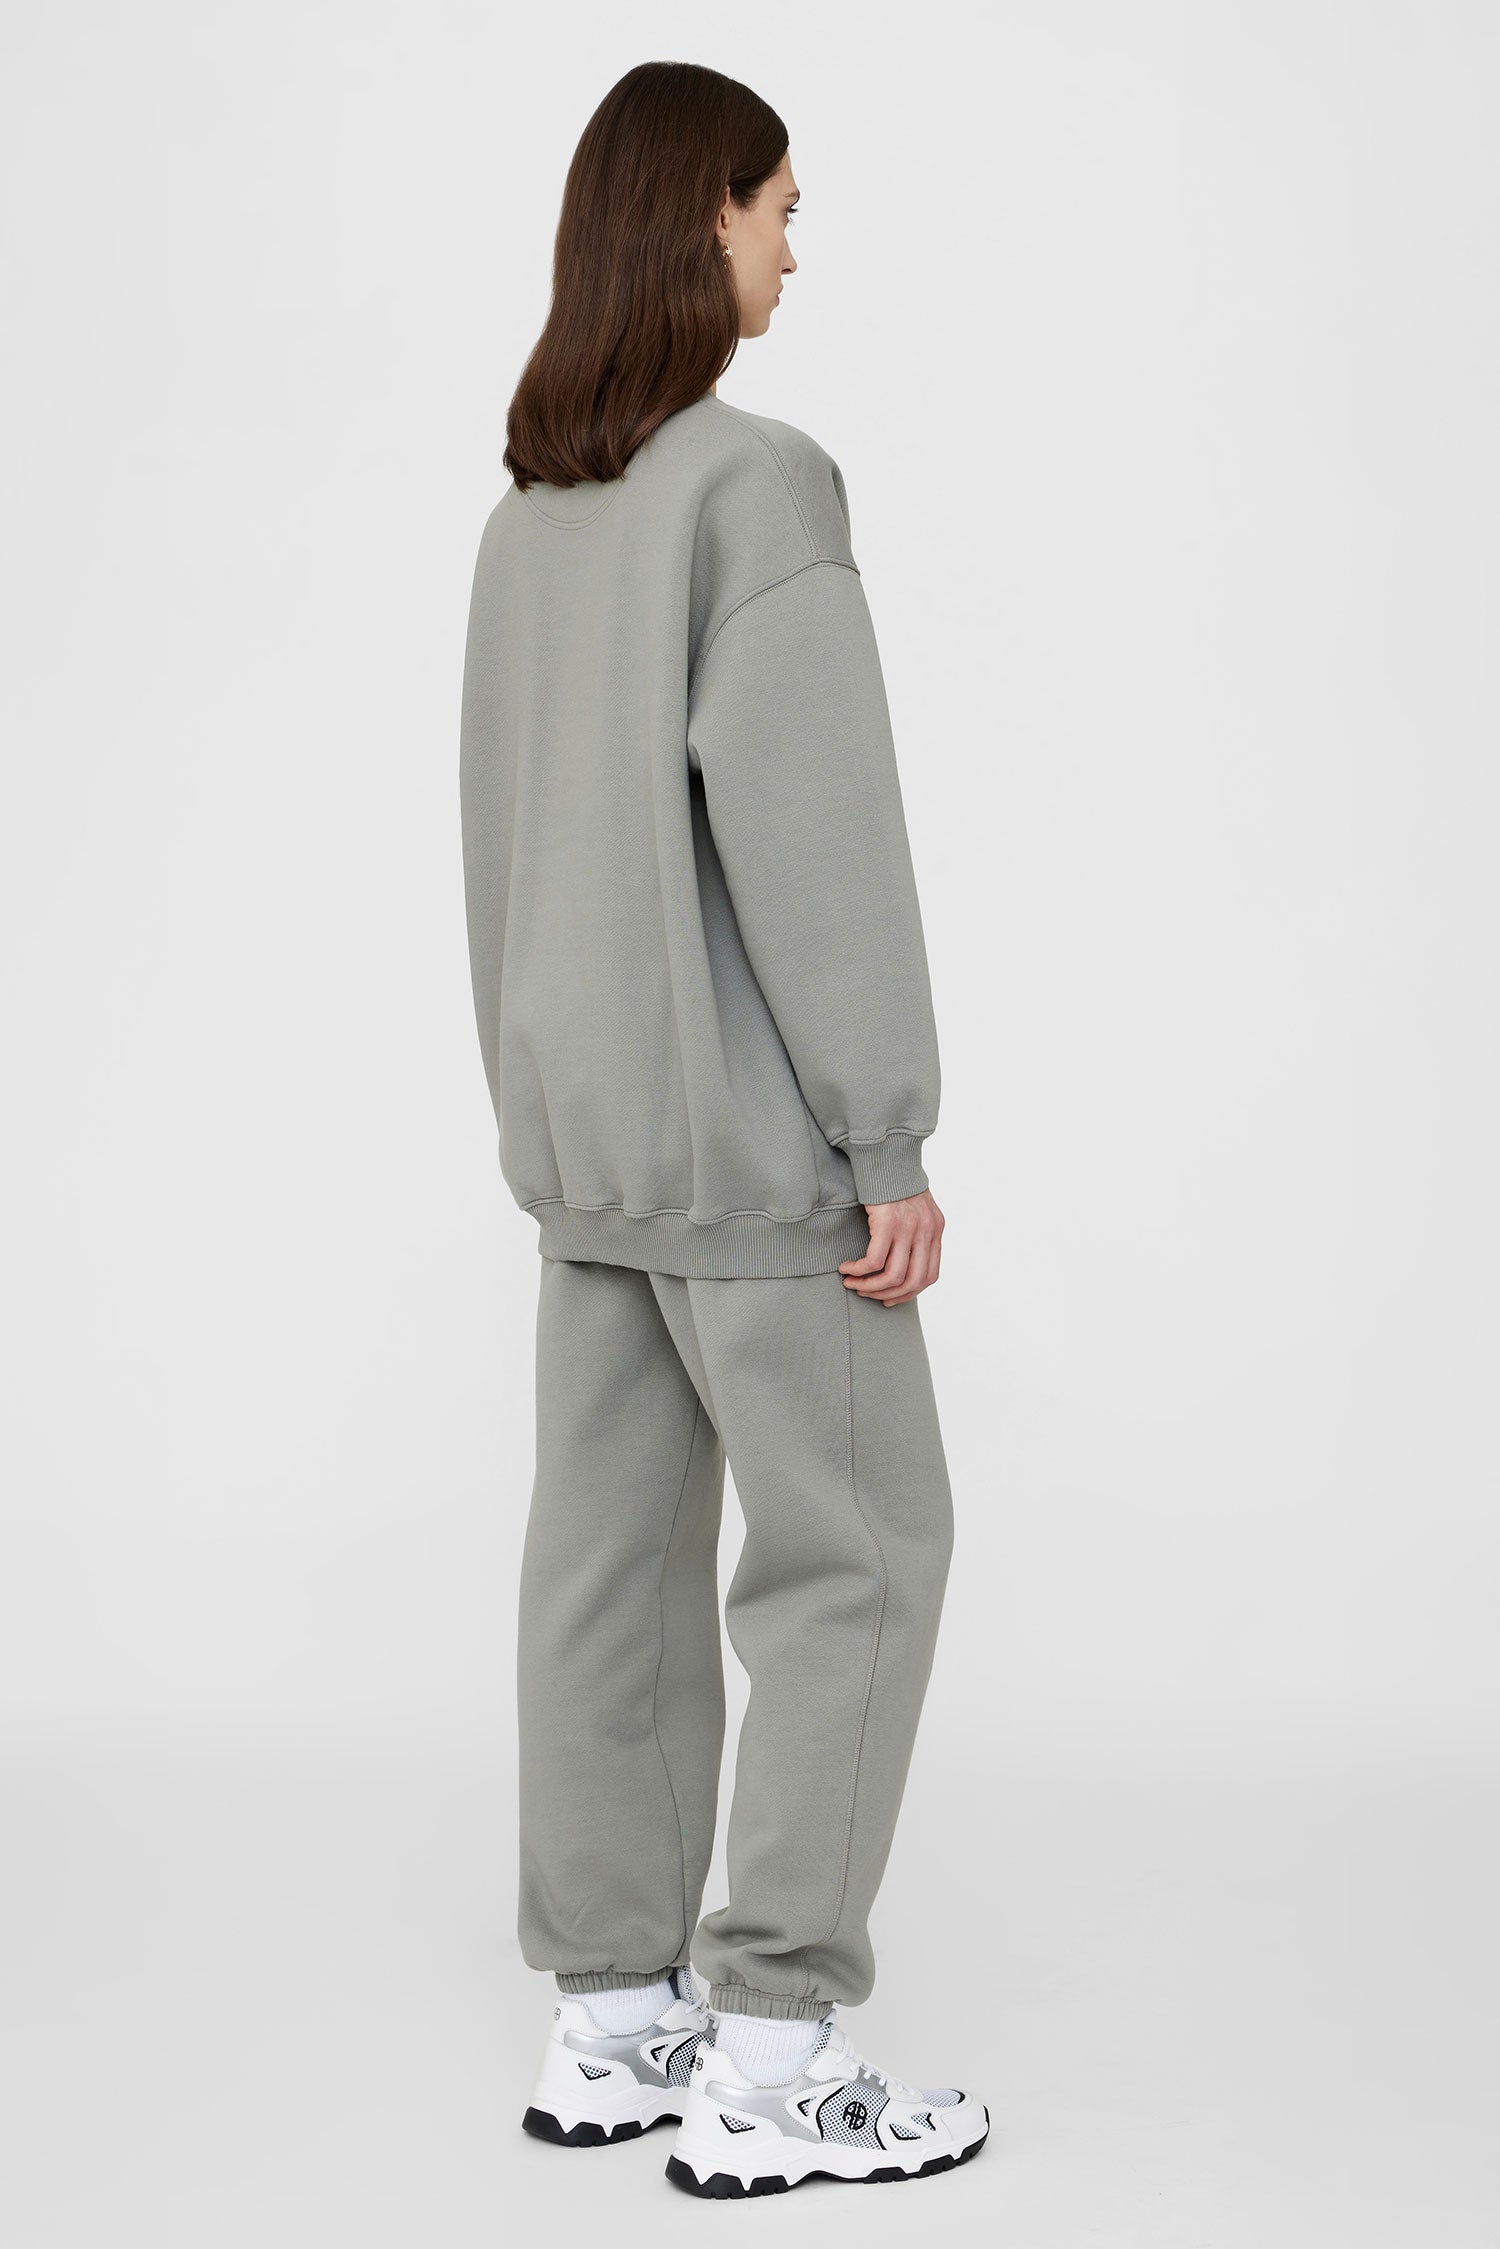 The Anine Bing Tyler Sweatshirt in Storm Grey available at The New Trend Australia